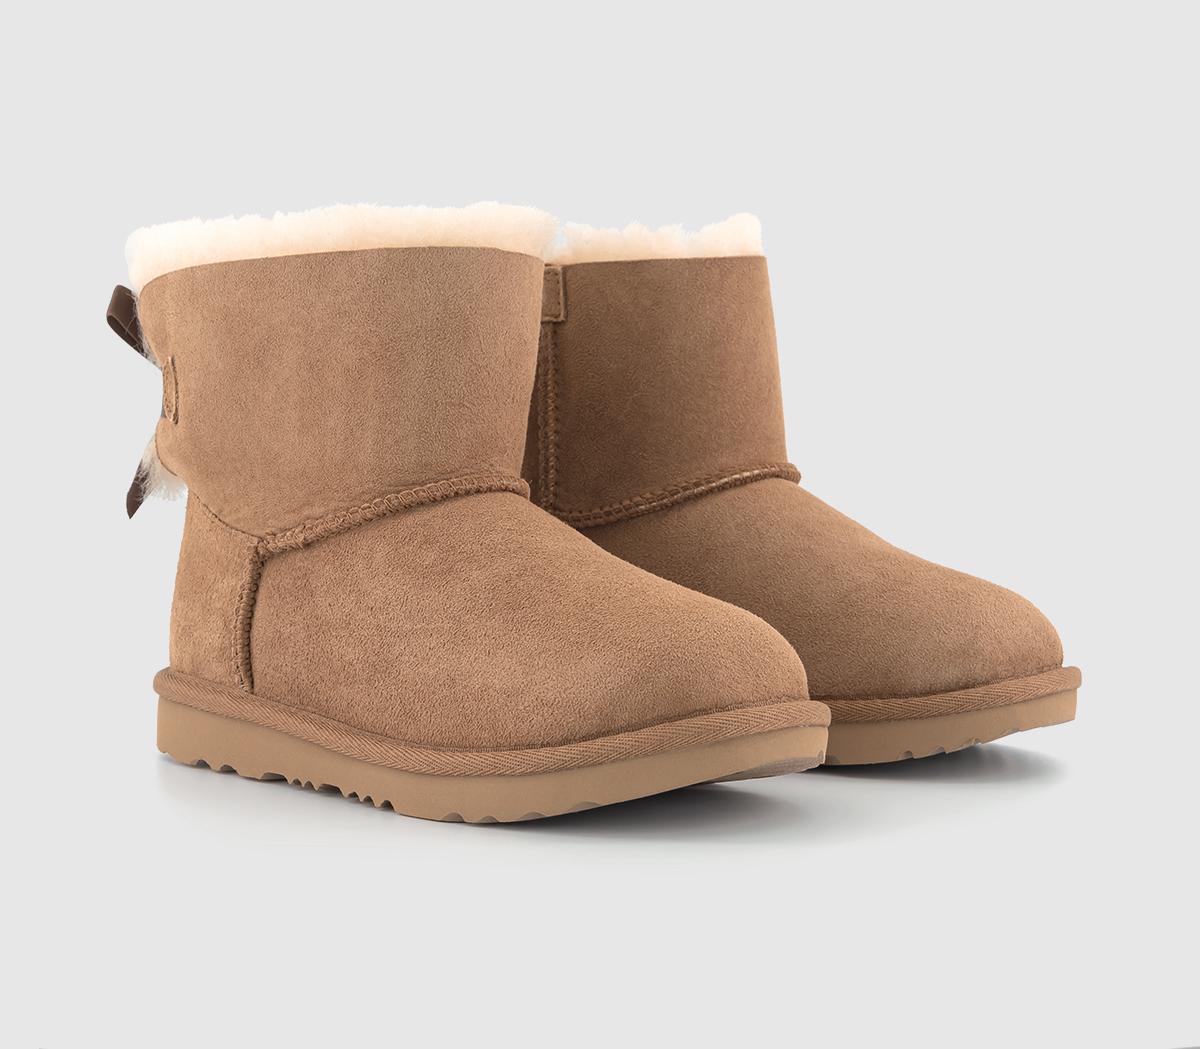 UGG Kids Mini Bailey Bow Ii Boots Chestnut, 1 Youth